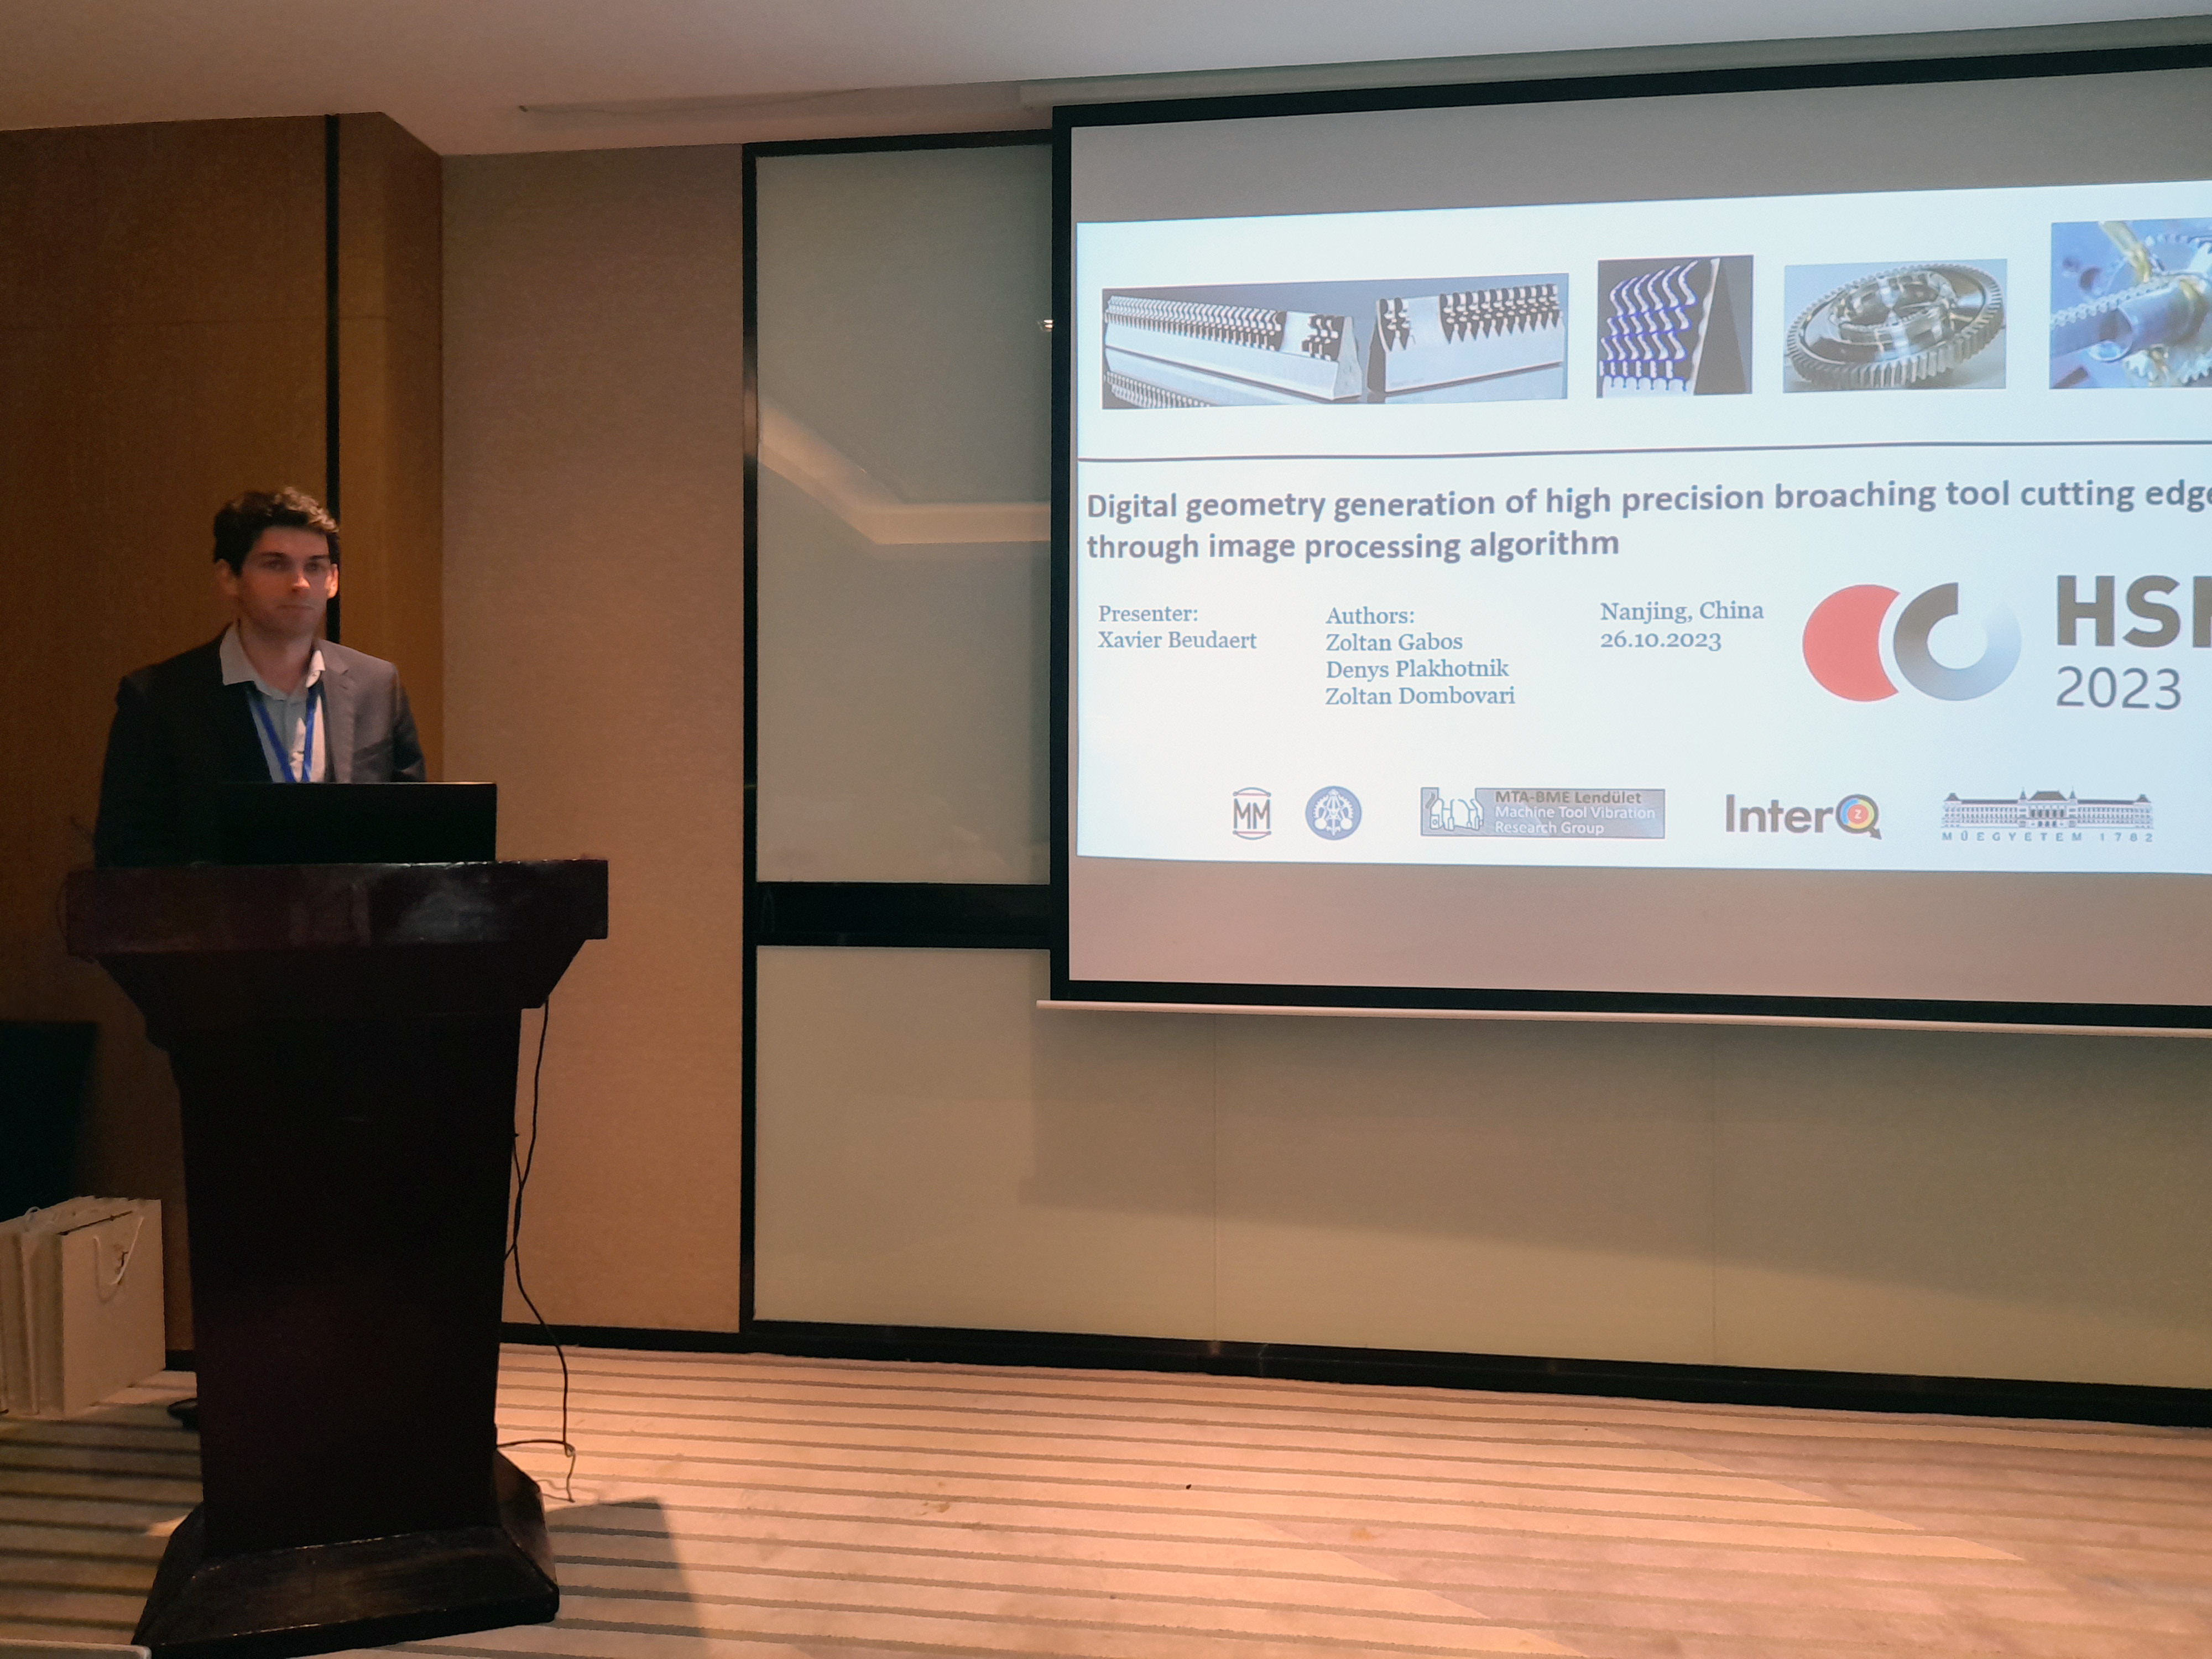 IDEKO shows in China how to achieve more precise and zero-defect high-speed machining